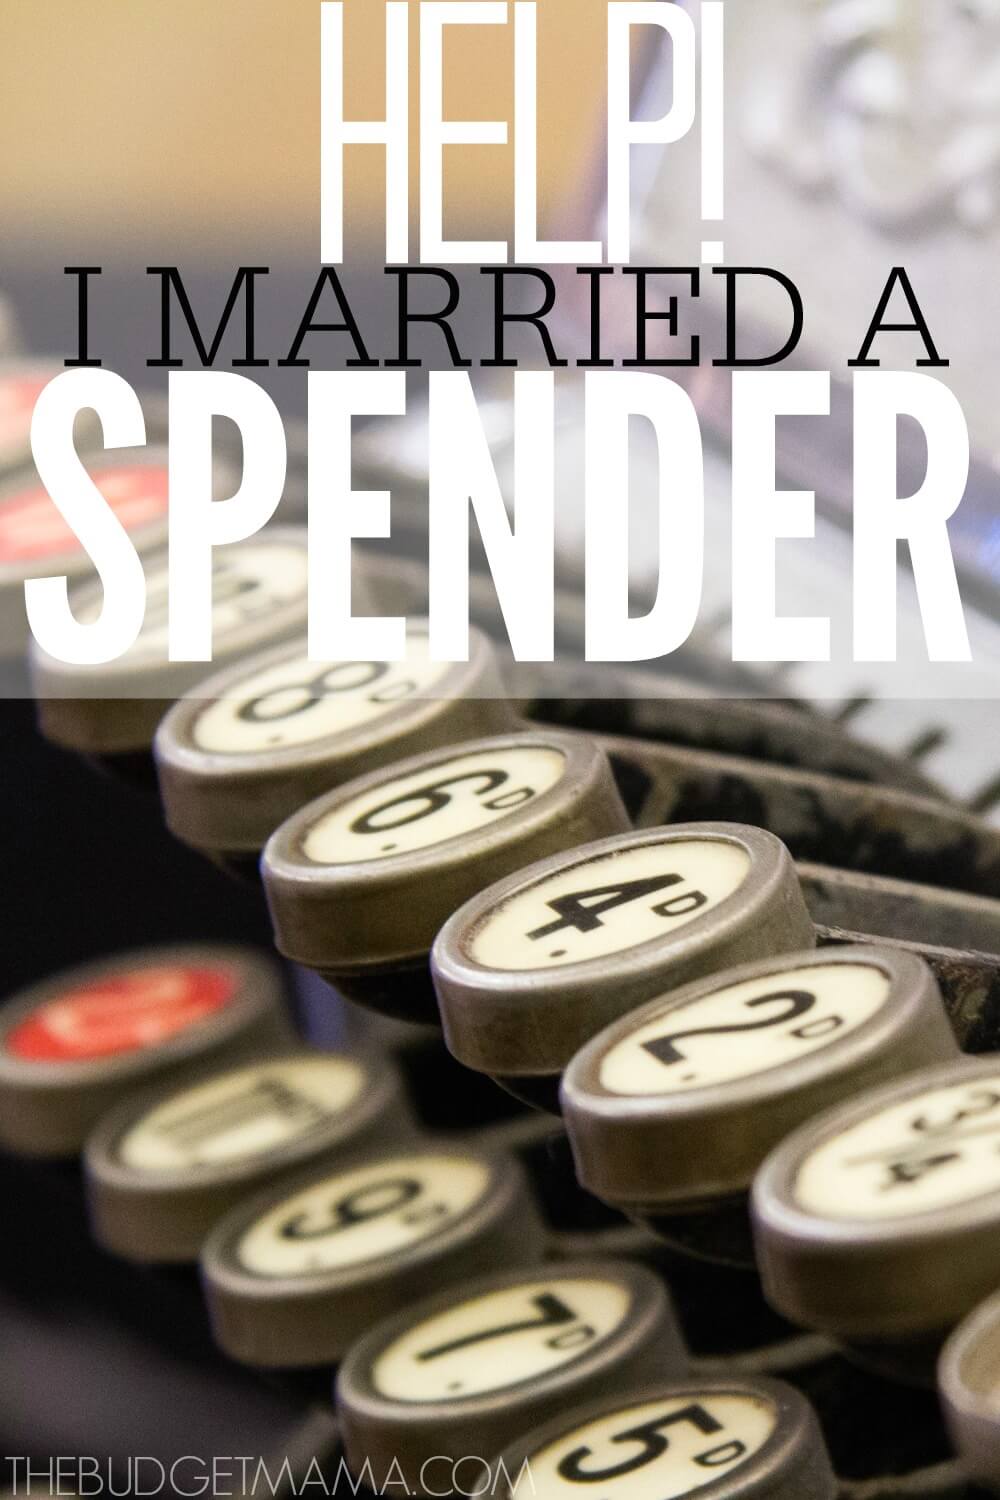 Help! I Married a Spender.